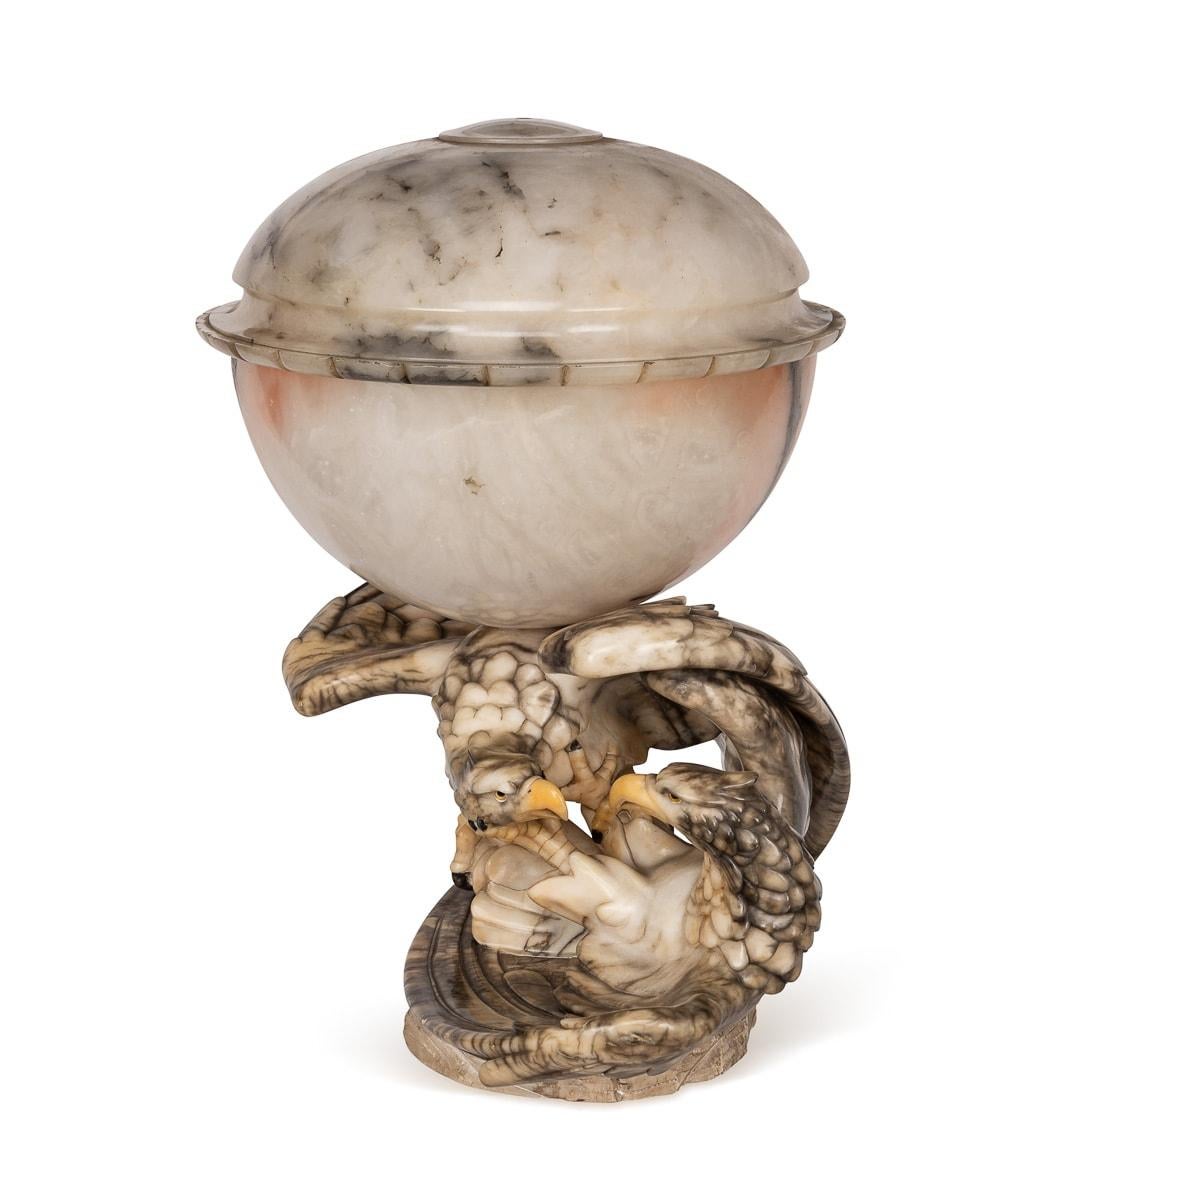 Antique early 20th Century Exquisite eagle table lamp meticulously handcrafted from two solid alabaster pieces, capturing a dynamic scene of two eagles in combat, featuring intricately detailed glass eyes. When illuminated, it emanates a gentle,